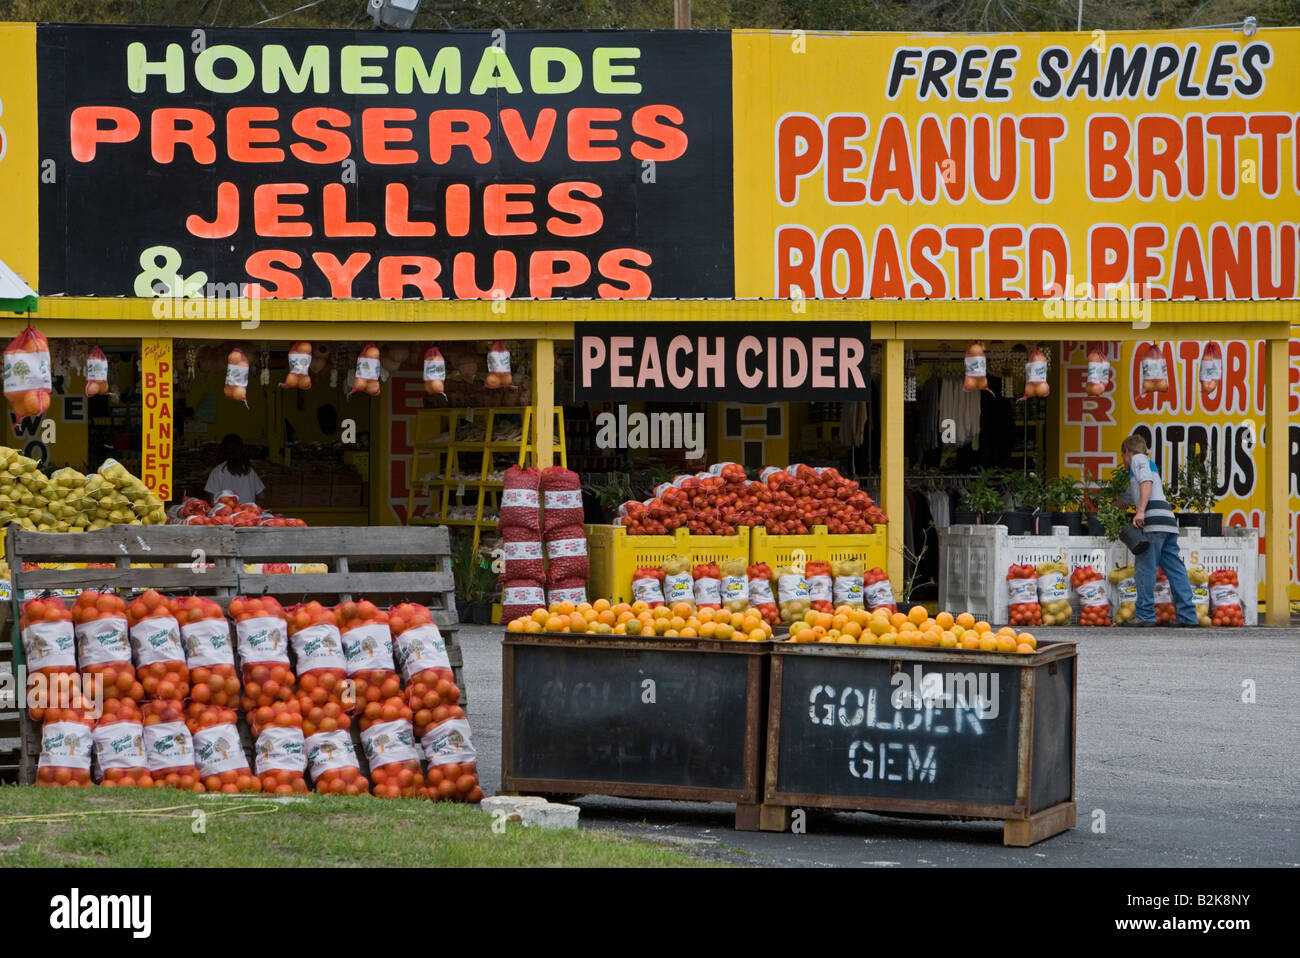 A roadside stand in northern Florida Stock Photo